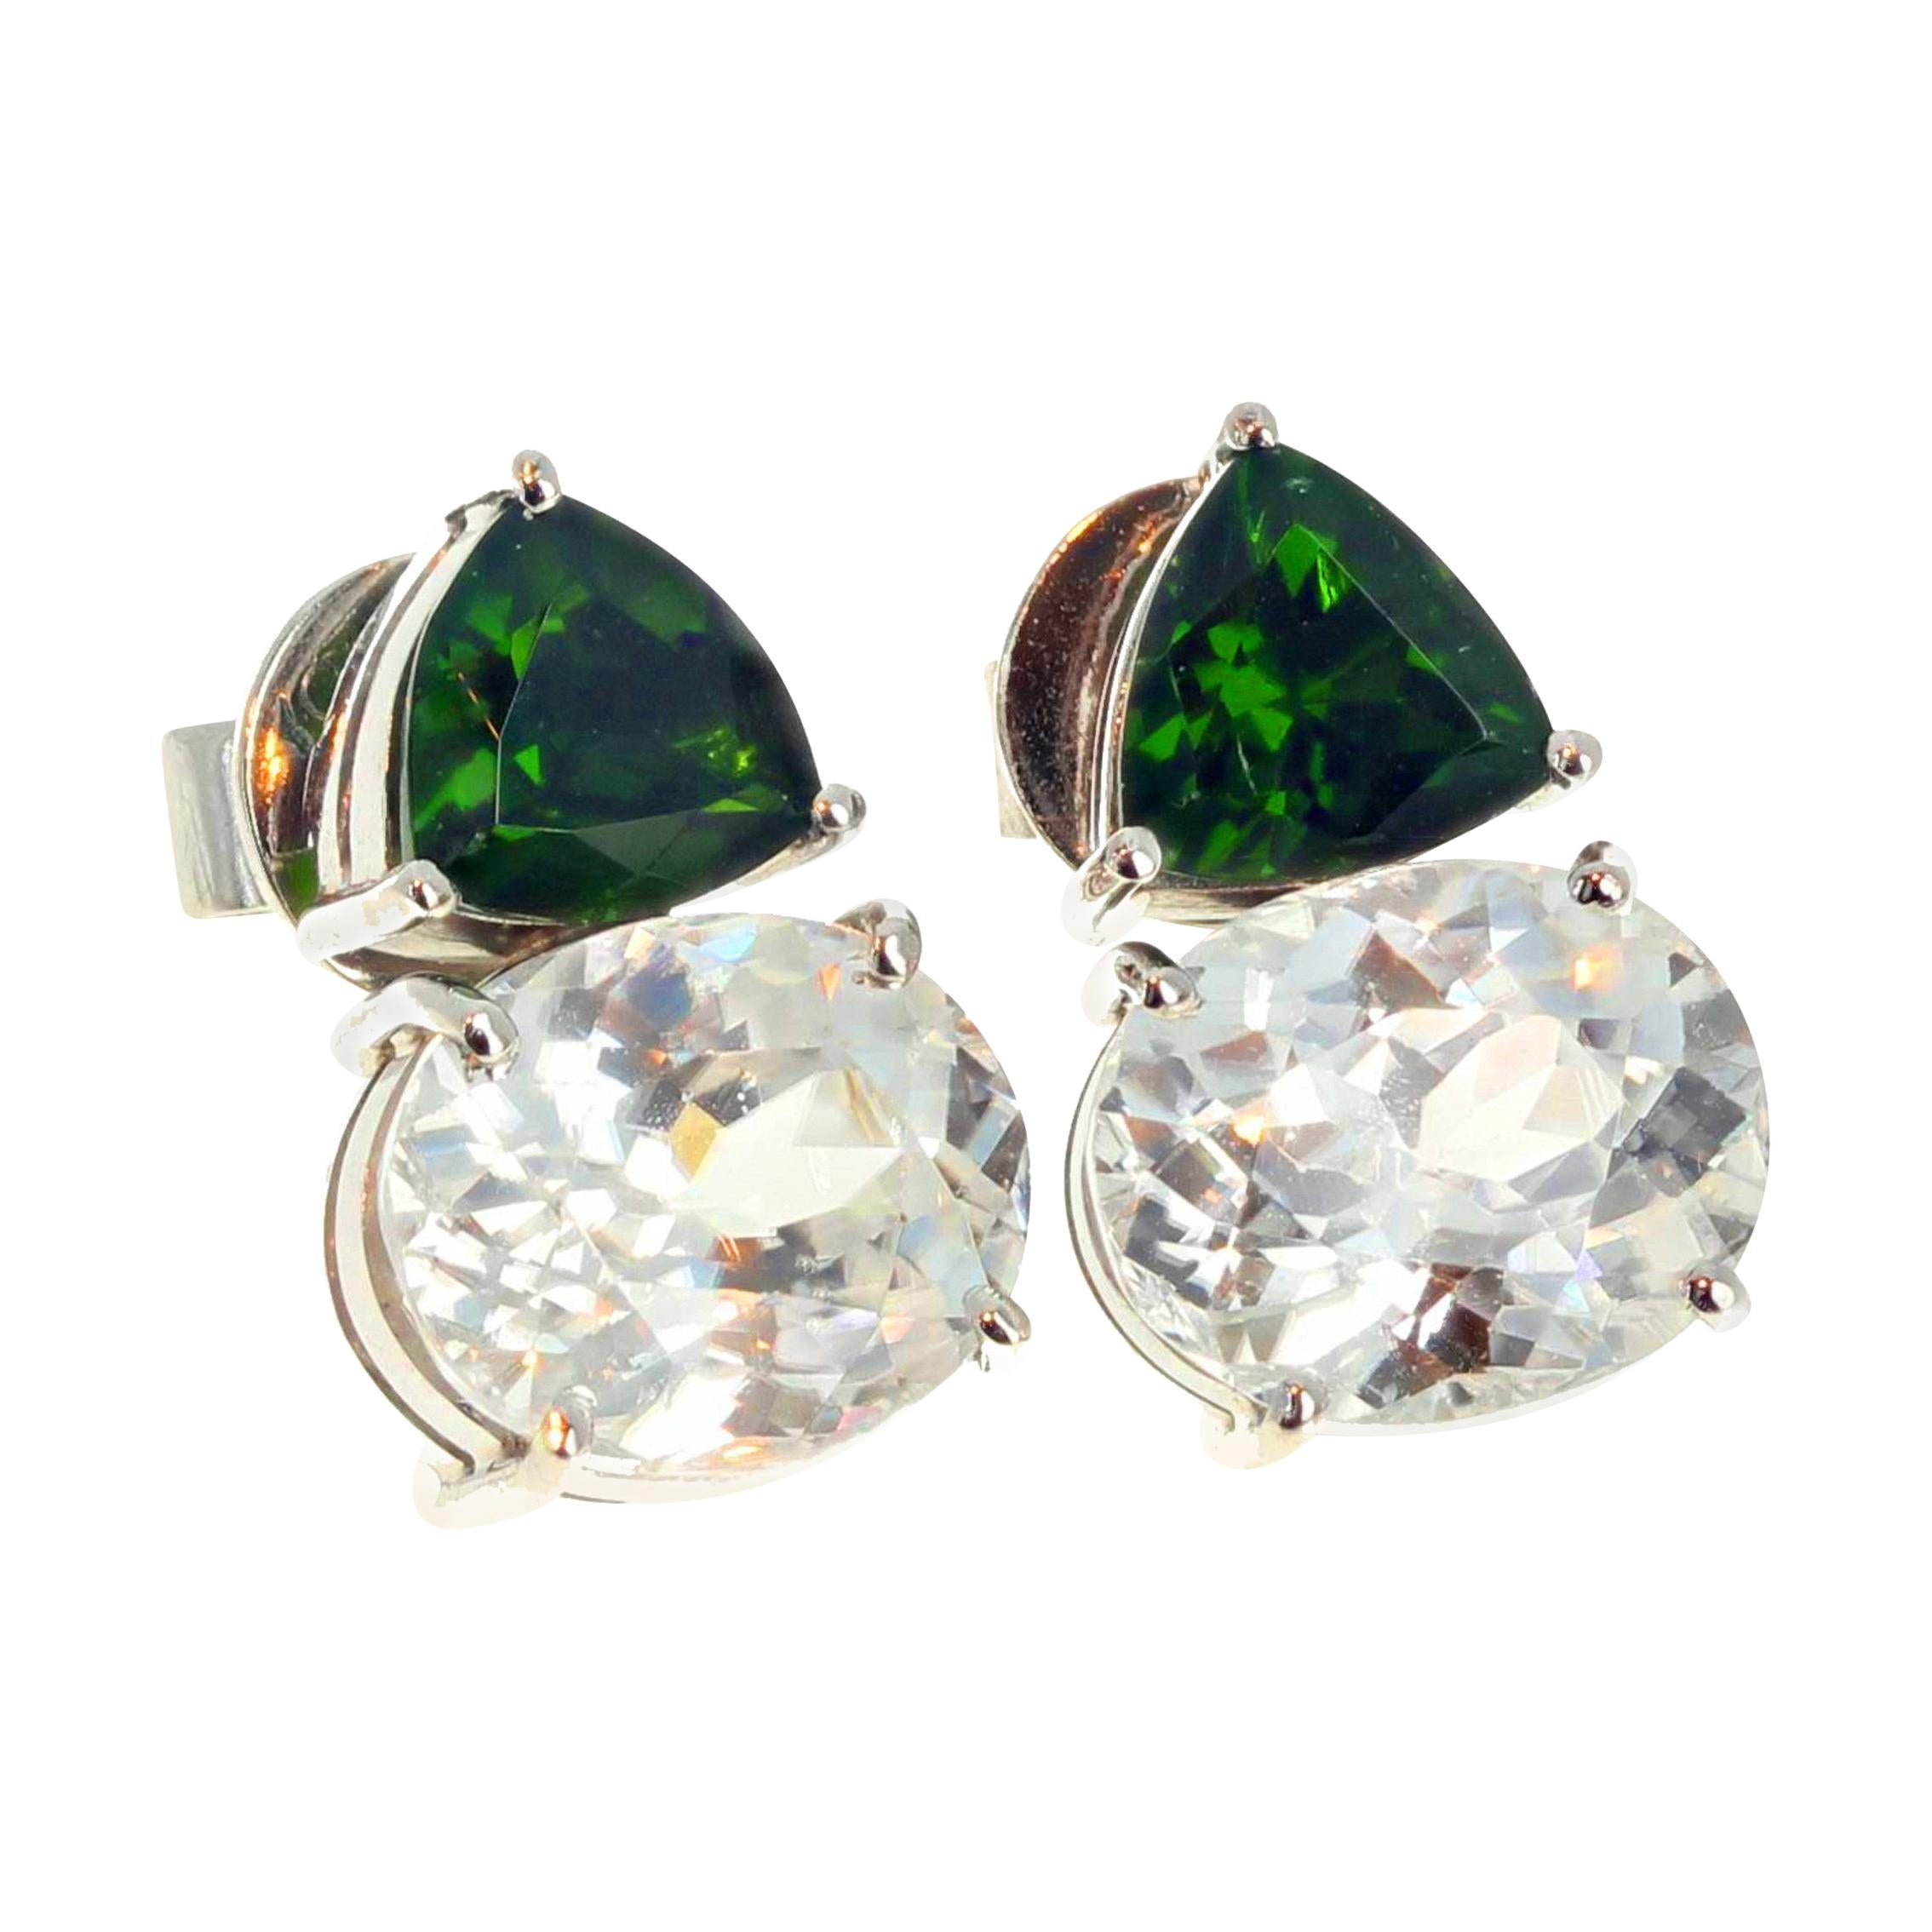 AJD GLITTERING Chrome Diopside & Natural Cambodian Zircons White Gold Earrings